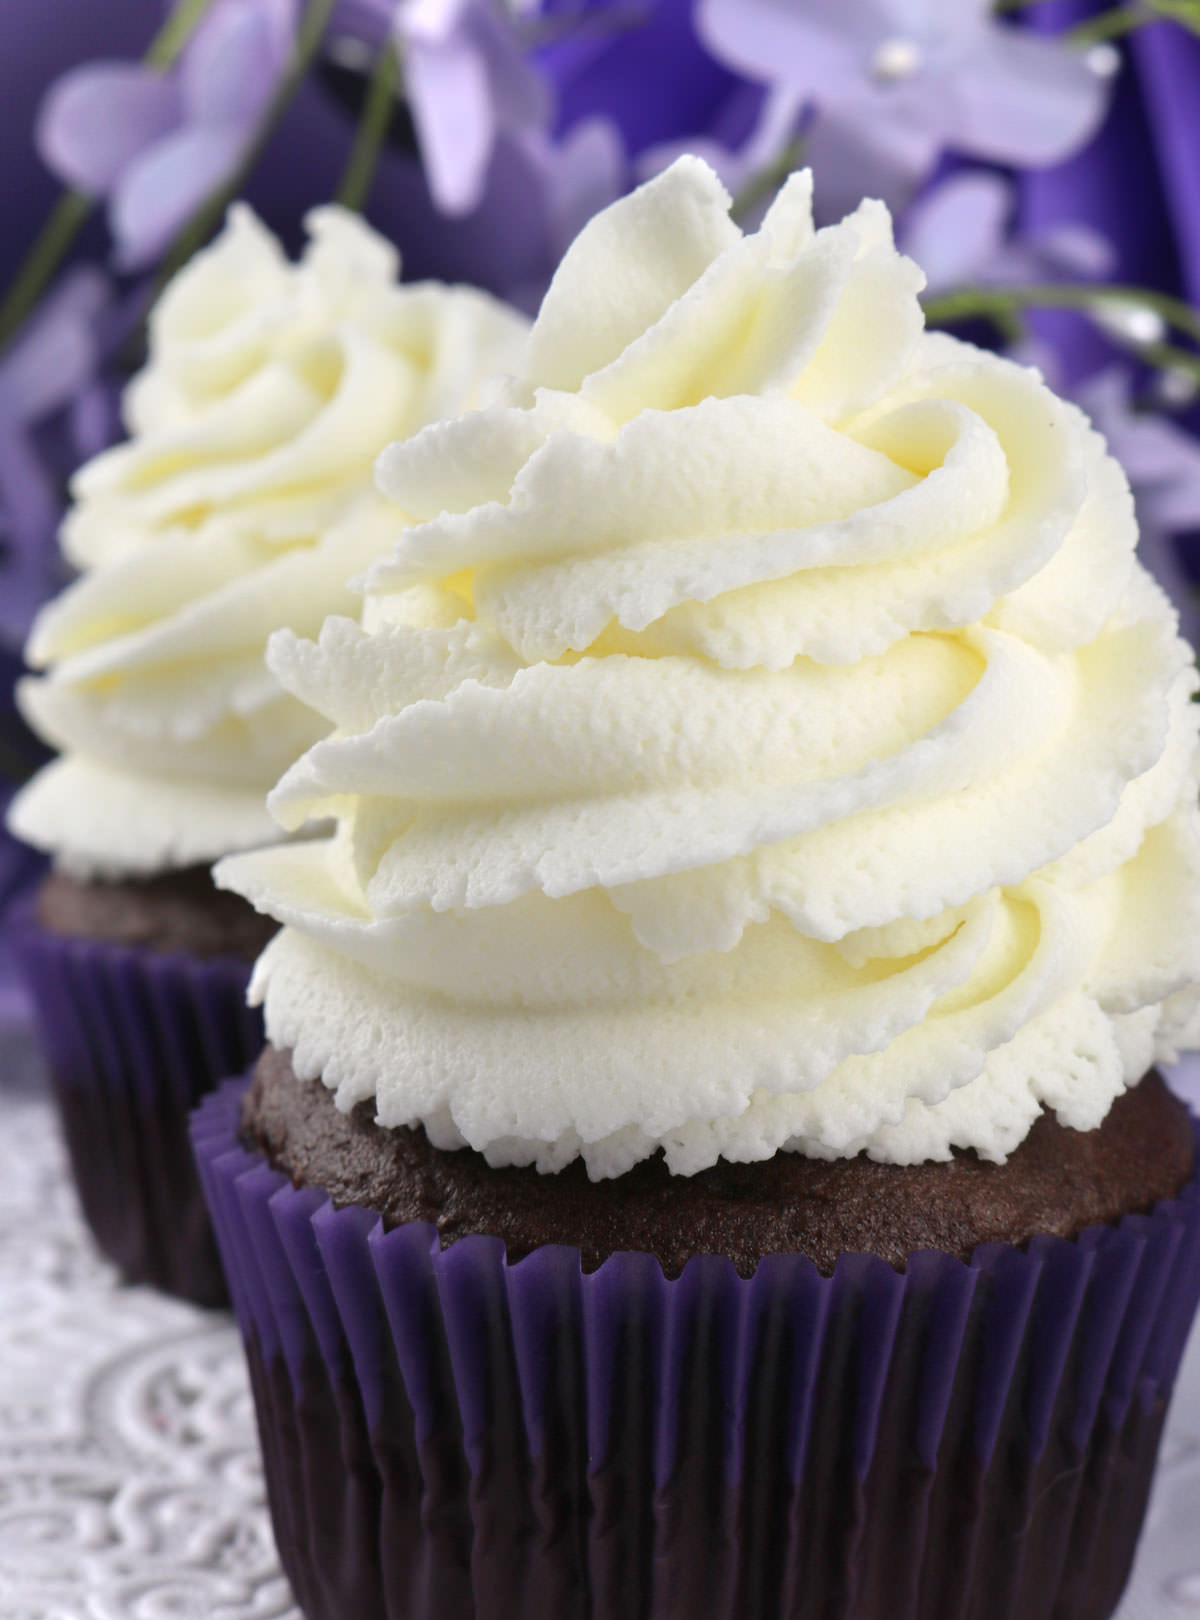 Closeup on two cupcakes topped with The Best Whipped Cream Frosting sitting on a white table in front of purple flowers.